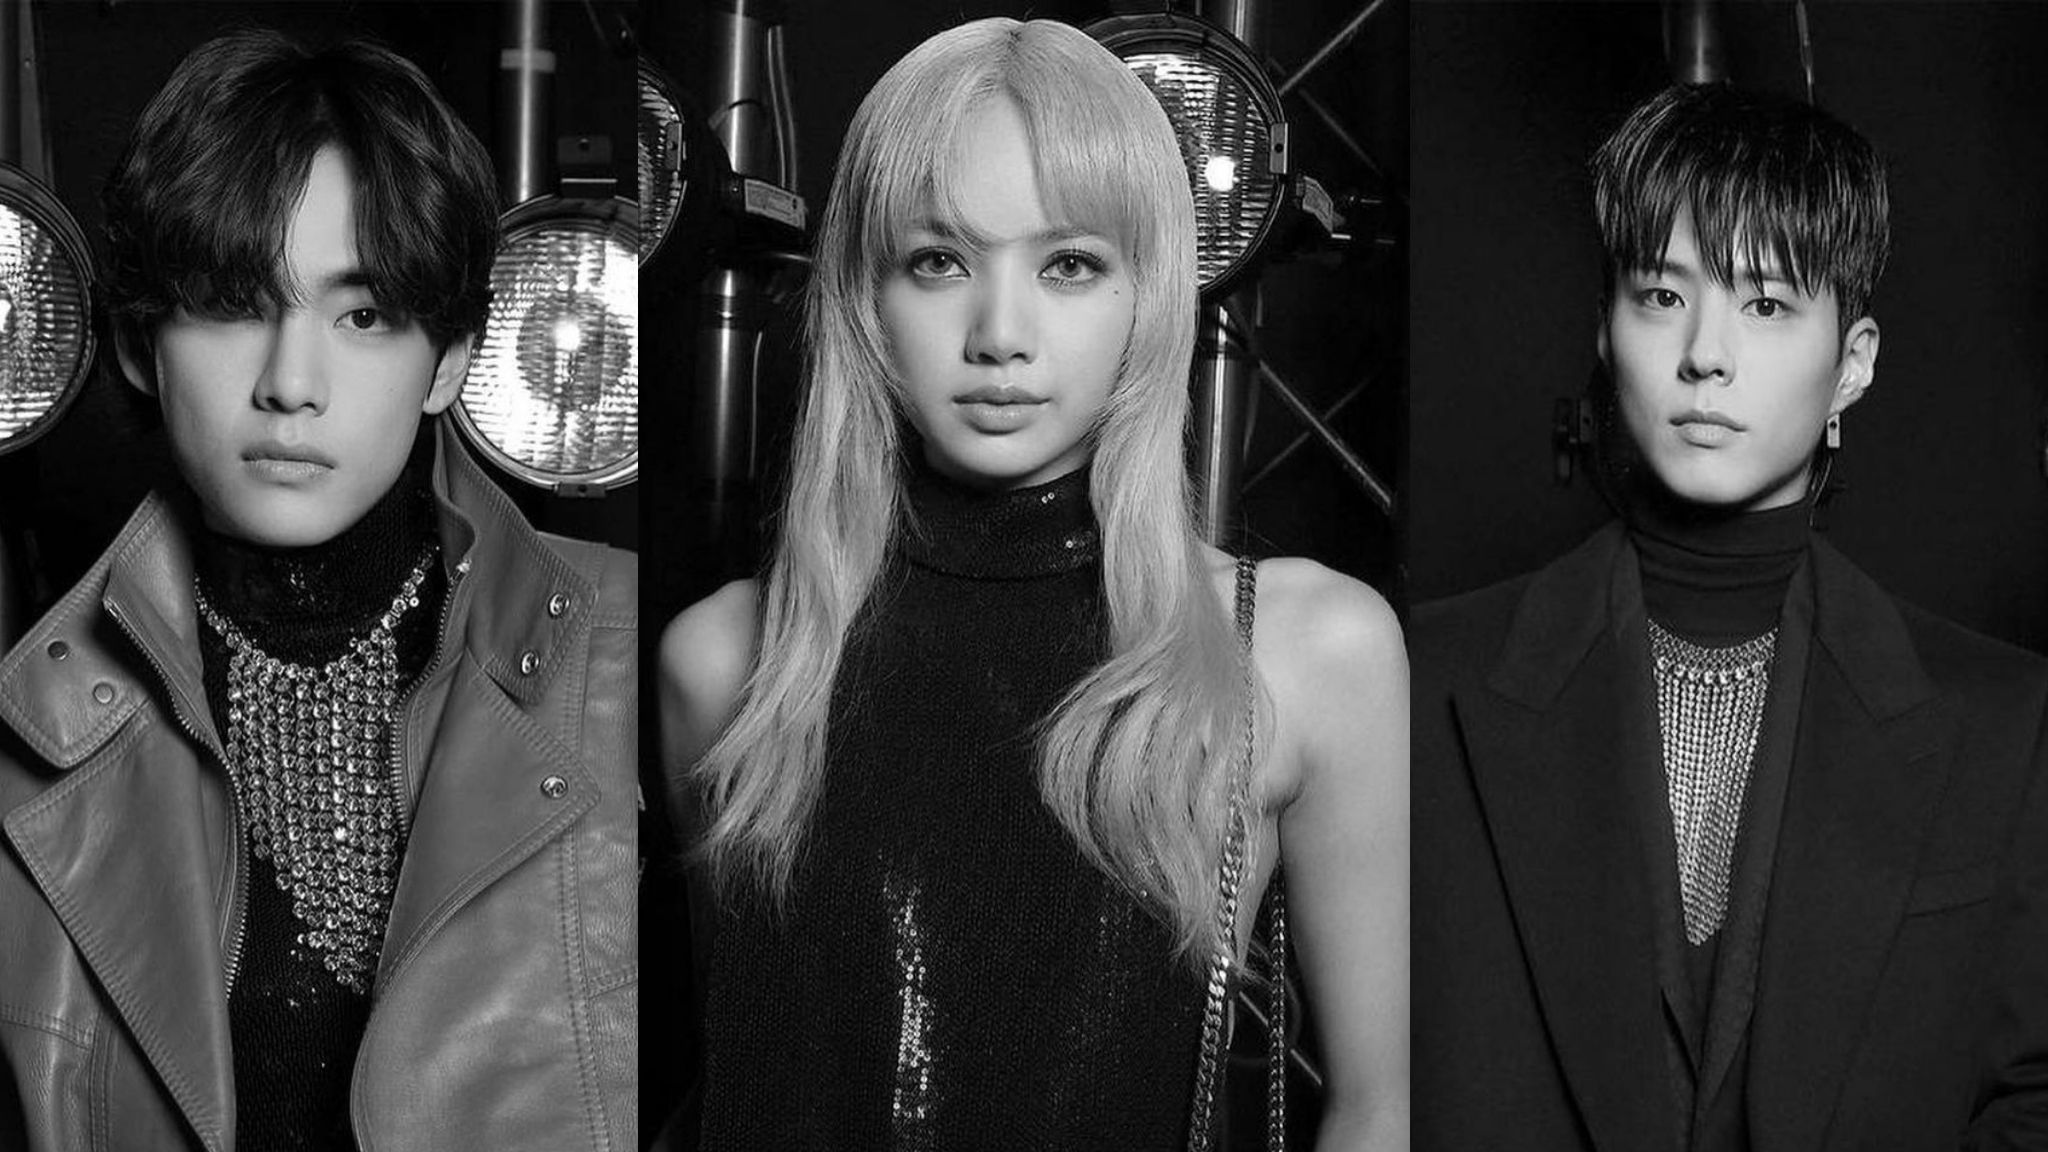 V, Lisa and Park Bo-gum steal the show at Paris Fashion Week - WATCH